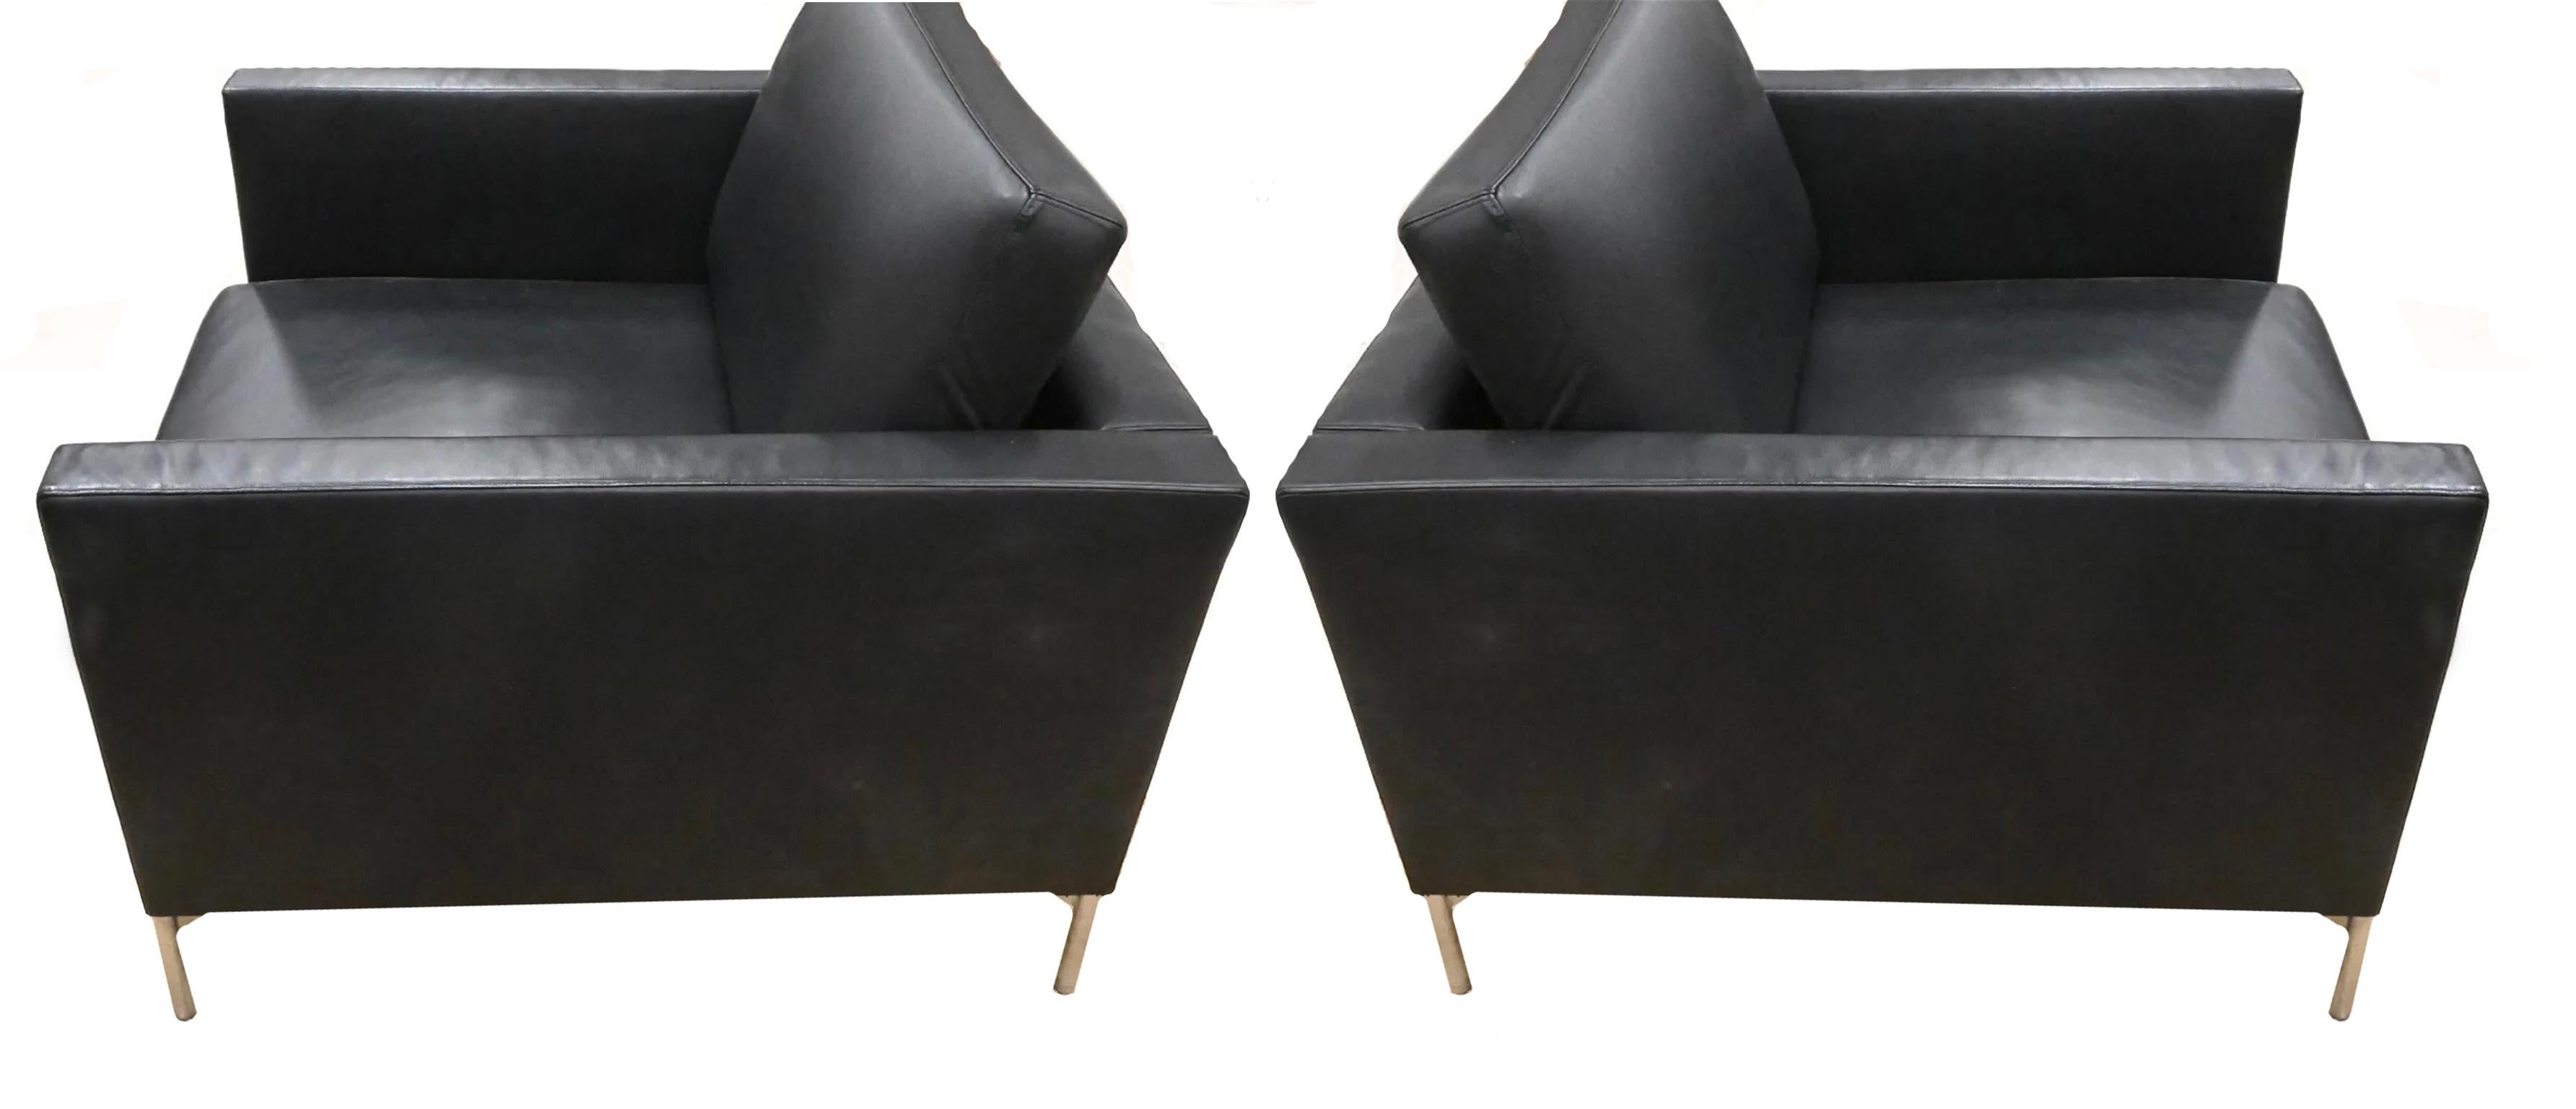 Pair of Modern Piero Lissoni for Knoll Divina Club Lounge Chairs Black Leather In Good Condition For Sale In BROOKLYN, NY